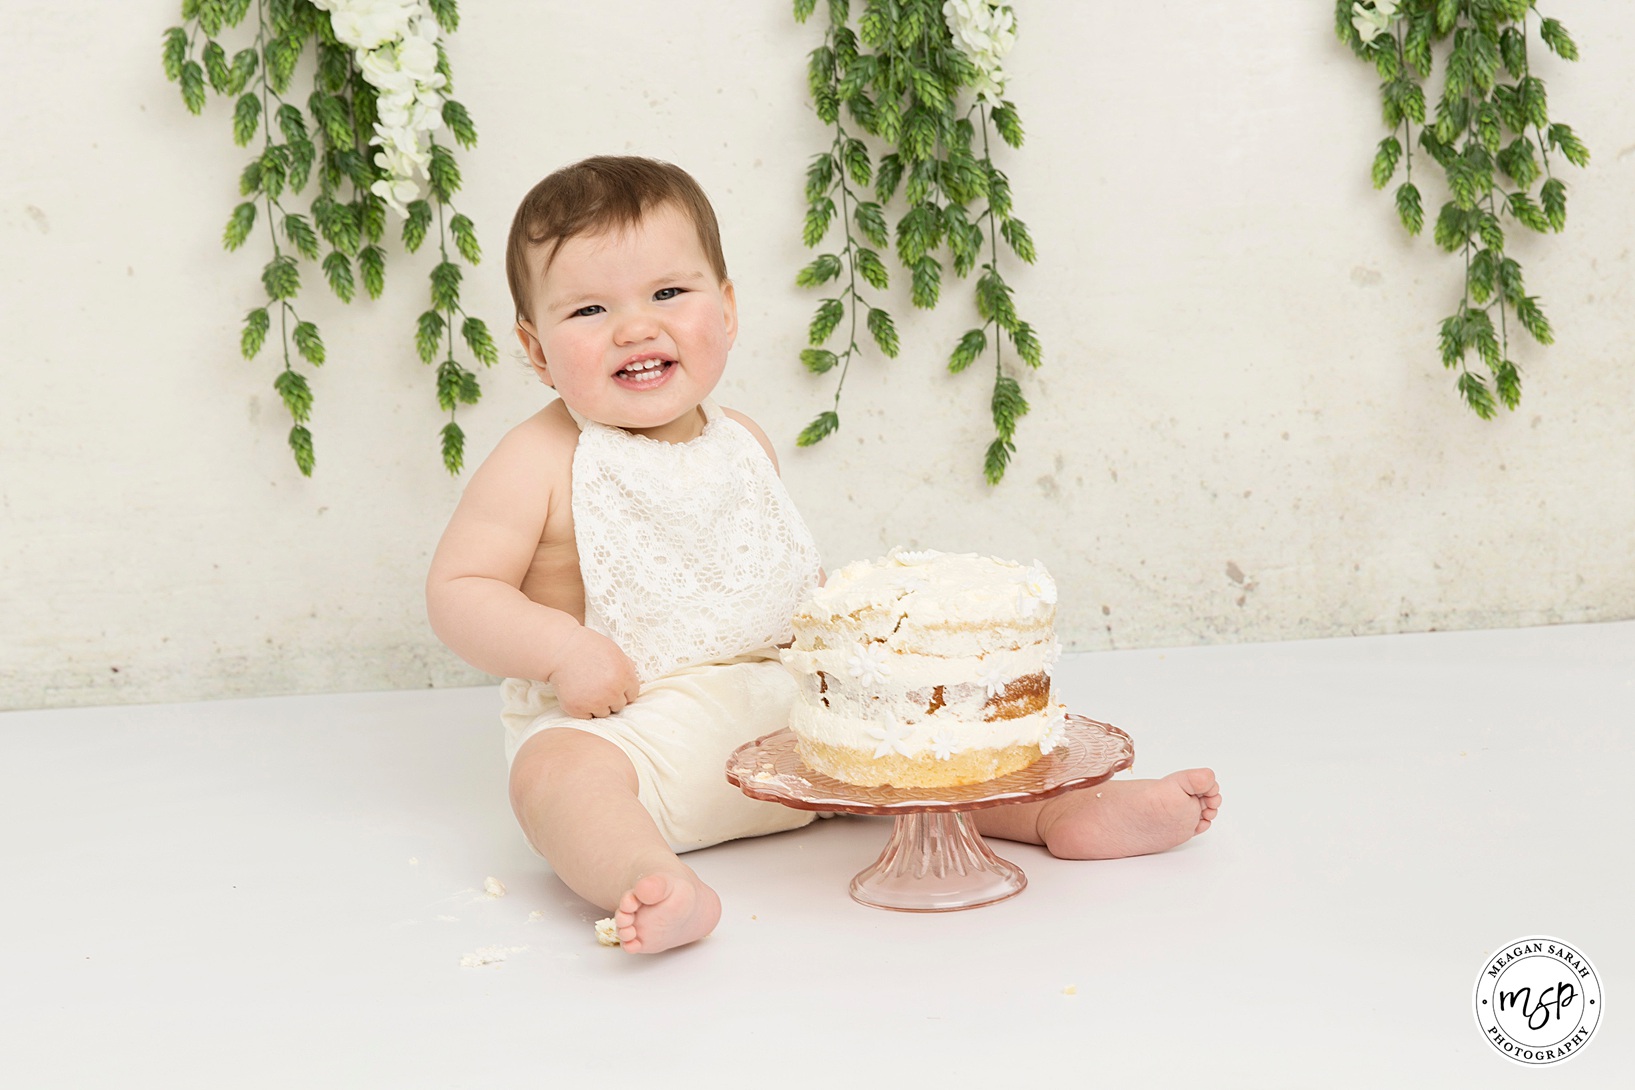 Bash the Cake,Birthday,Birthday Fun,Bunting.,Cake,Cake Smash,Cake Smash Backgrounds,Cake Smash Photo Shoot,Cake Smash Photographer,Cake Smash Set,Children,Floral,Leeds Cake Smashes,Little Girl,Meagan Sarah Photography,Messy,One Year Old,Photo Fun,babies,